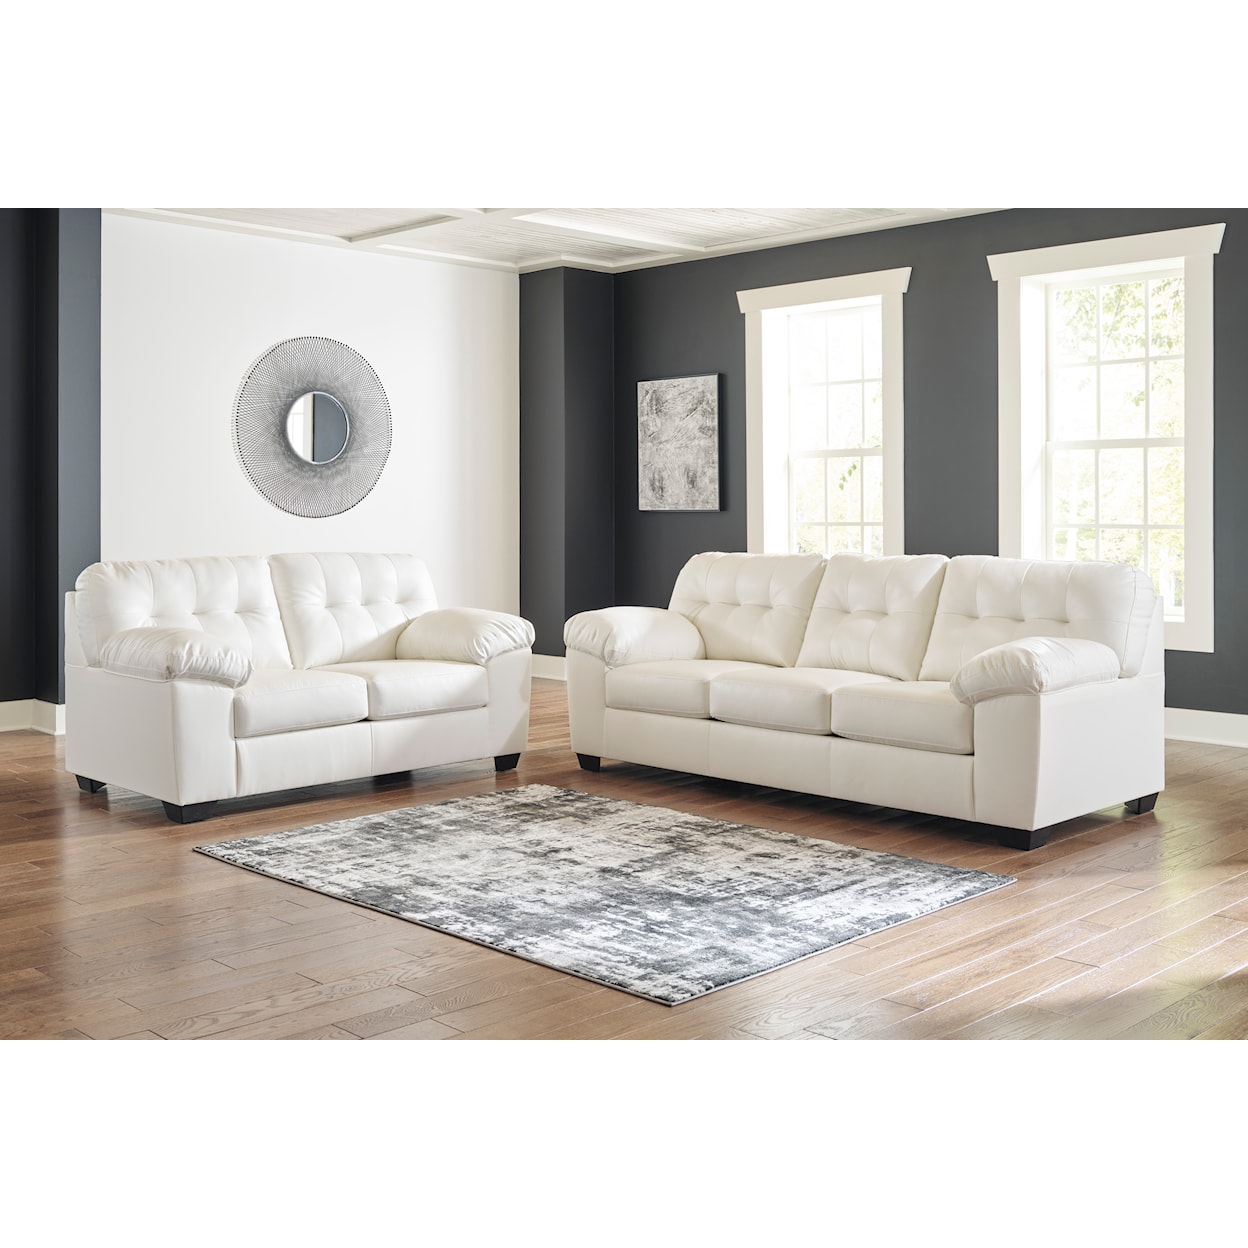 Signature Design by Ashley Donlen Sofa and Loveseat